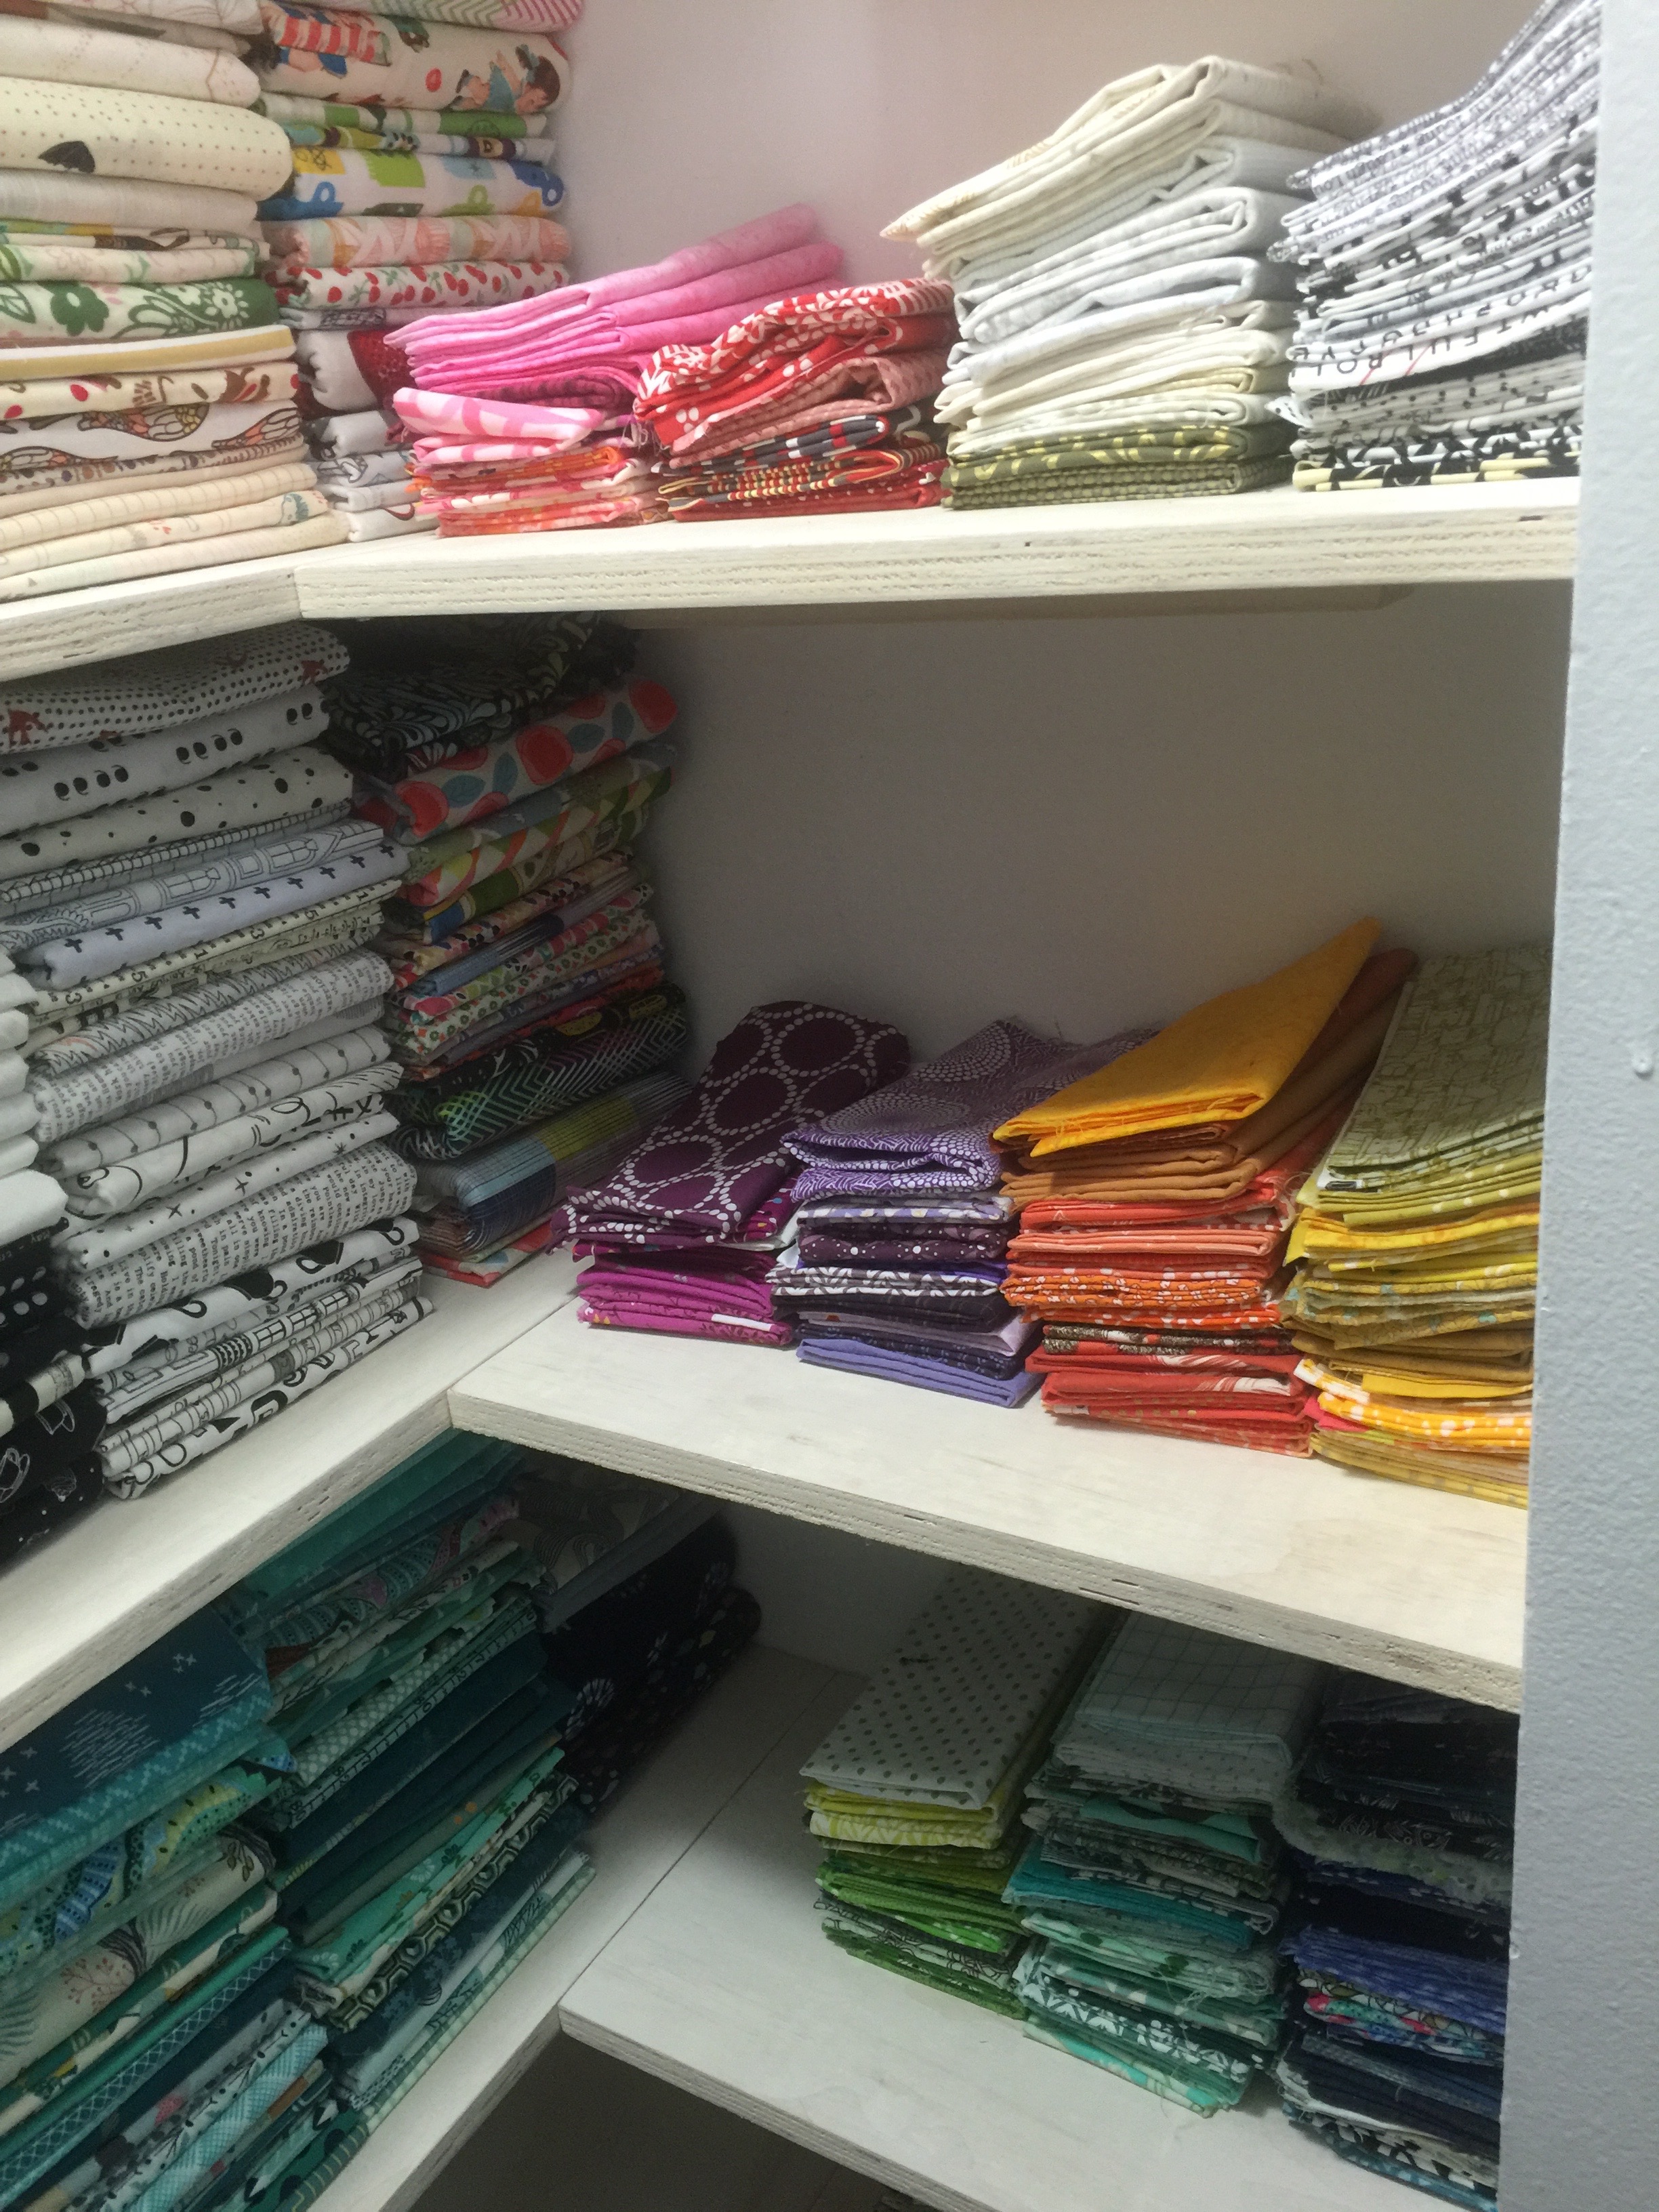 Fat quarters on the other side